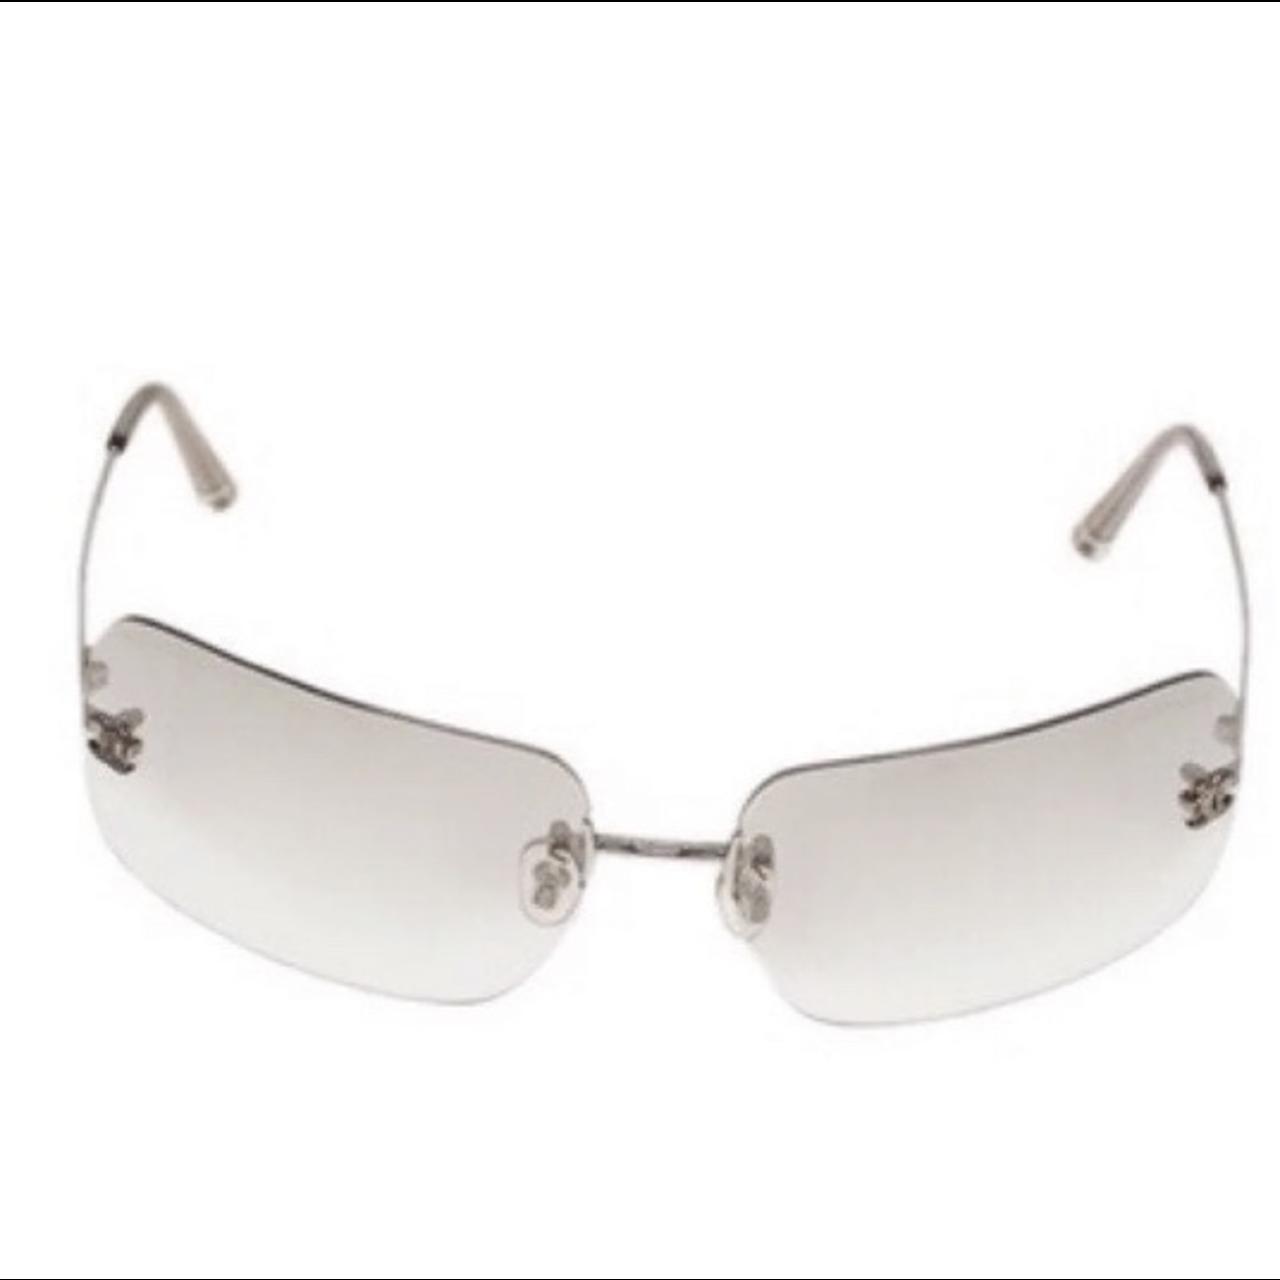  SOLD , Vintage Chanel Rimless Shades #Chanel